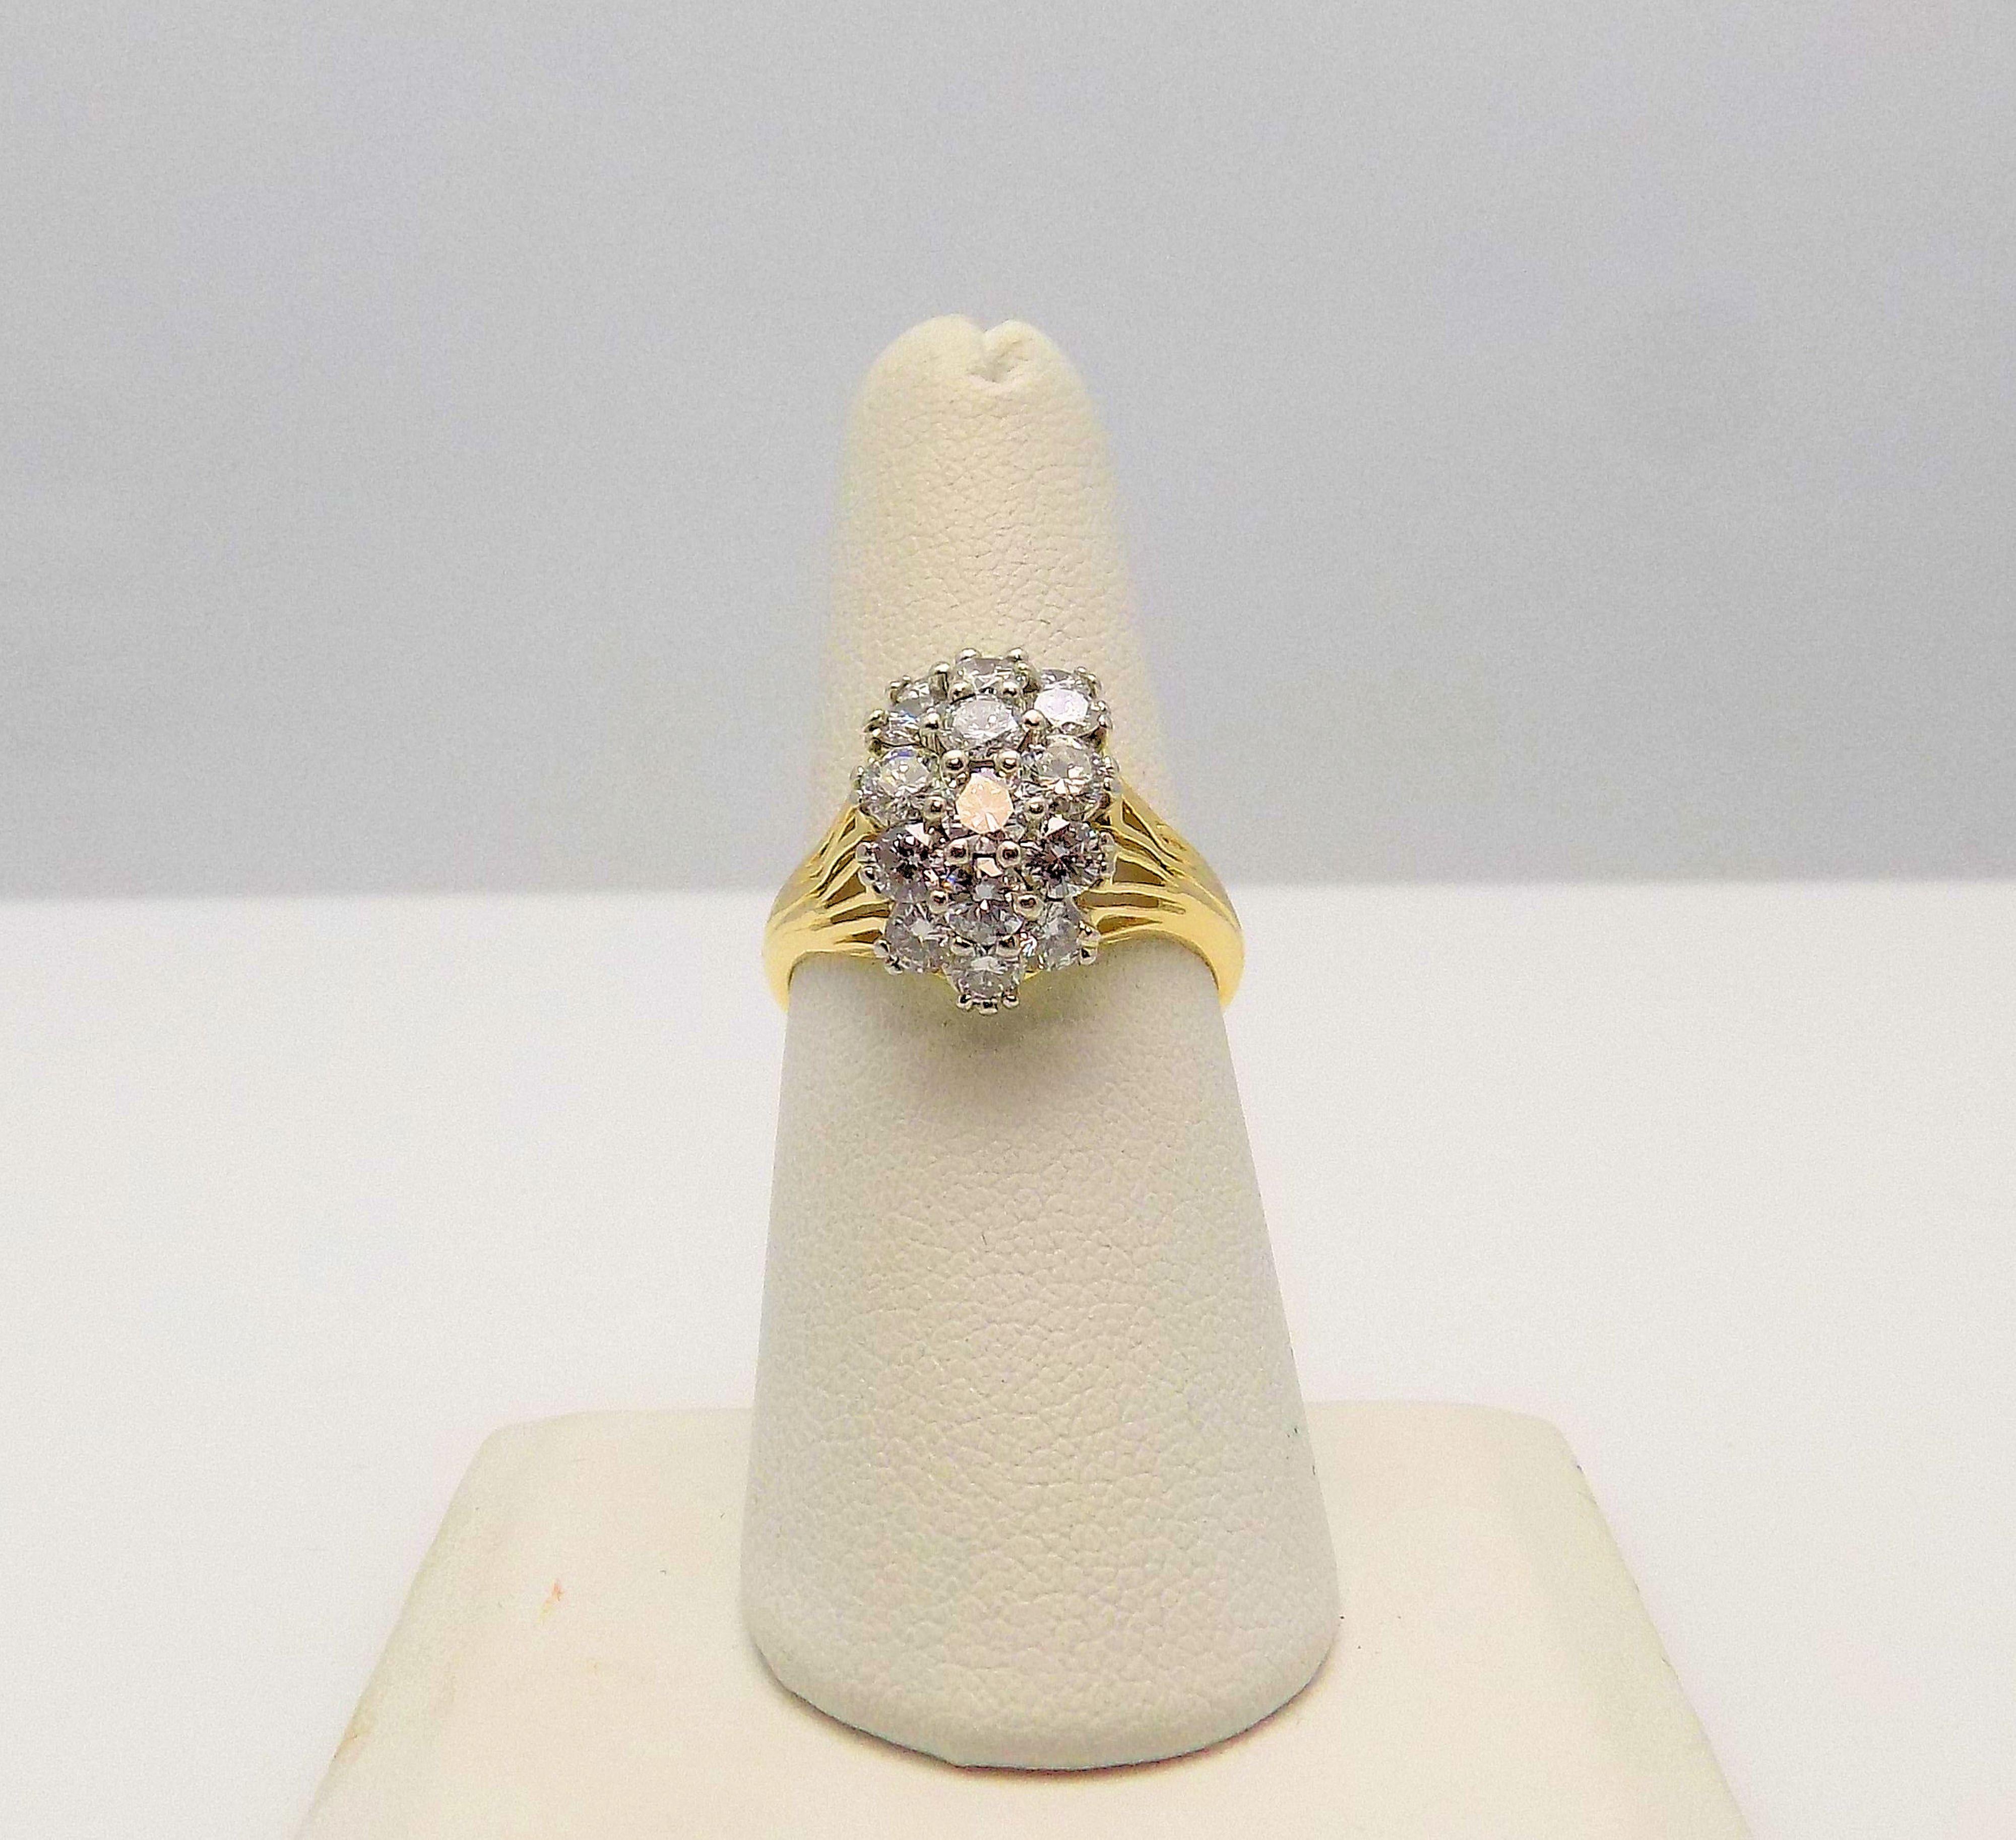 Stunning 18 Karat Yellow Gold Cluster Ring featuring 16 Round Brilliant Diamonds 2.00 Carat Total Weight; VS2-SI1, G-H; Finger Size 7.5; 3.5 DWT or 5.44 Grams.